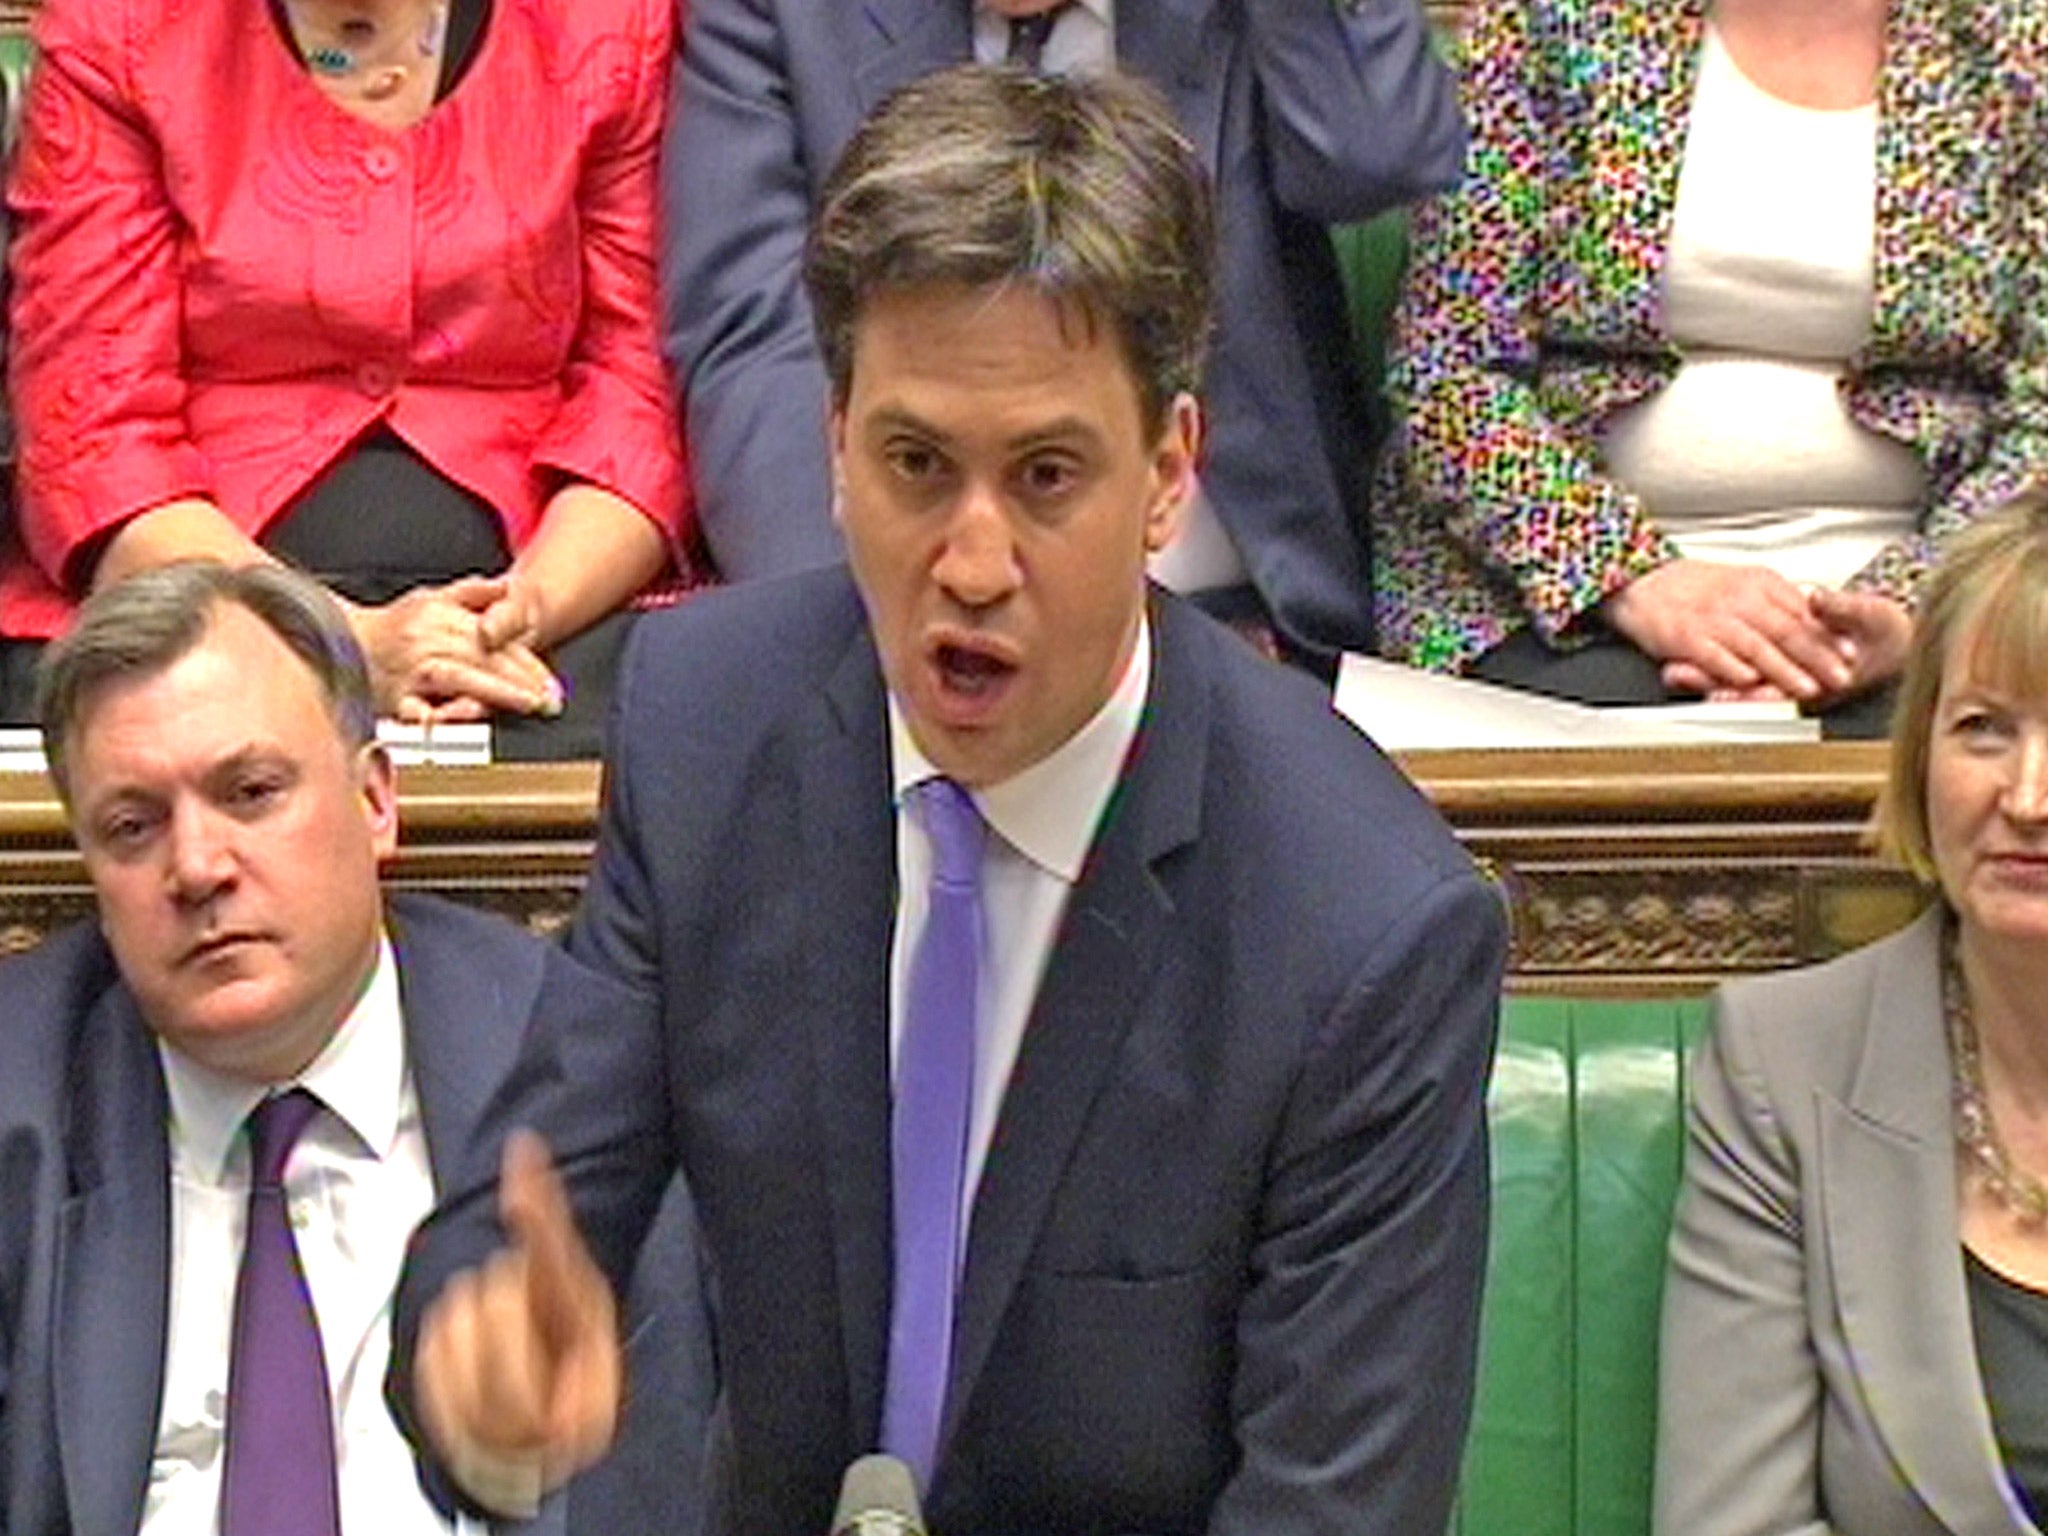 'It’s the same old Tories': Labour leader Ed Miliband